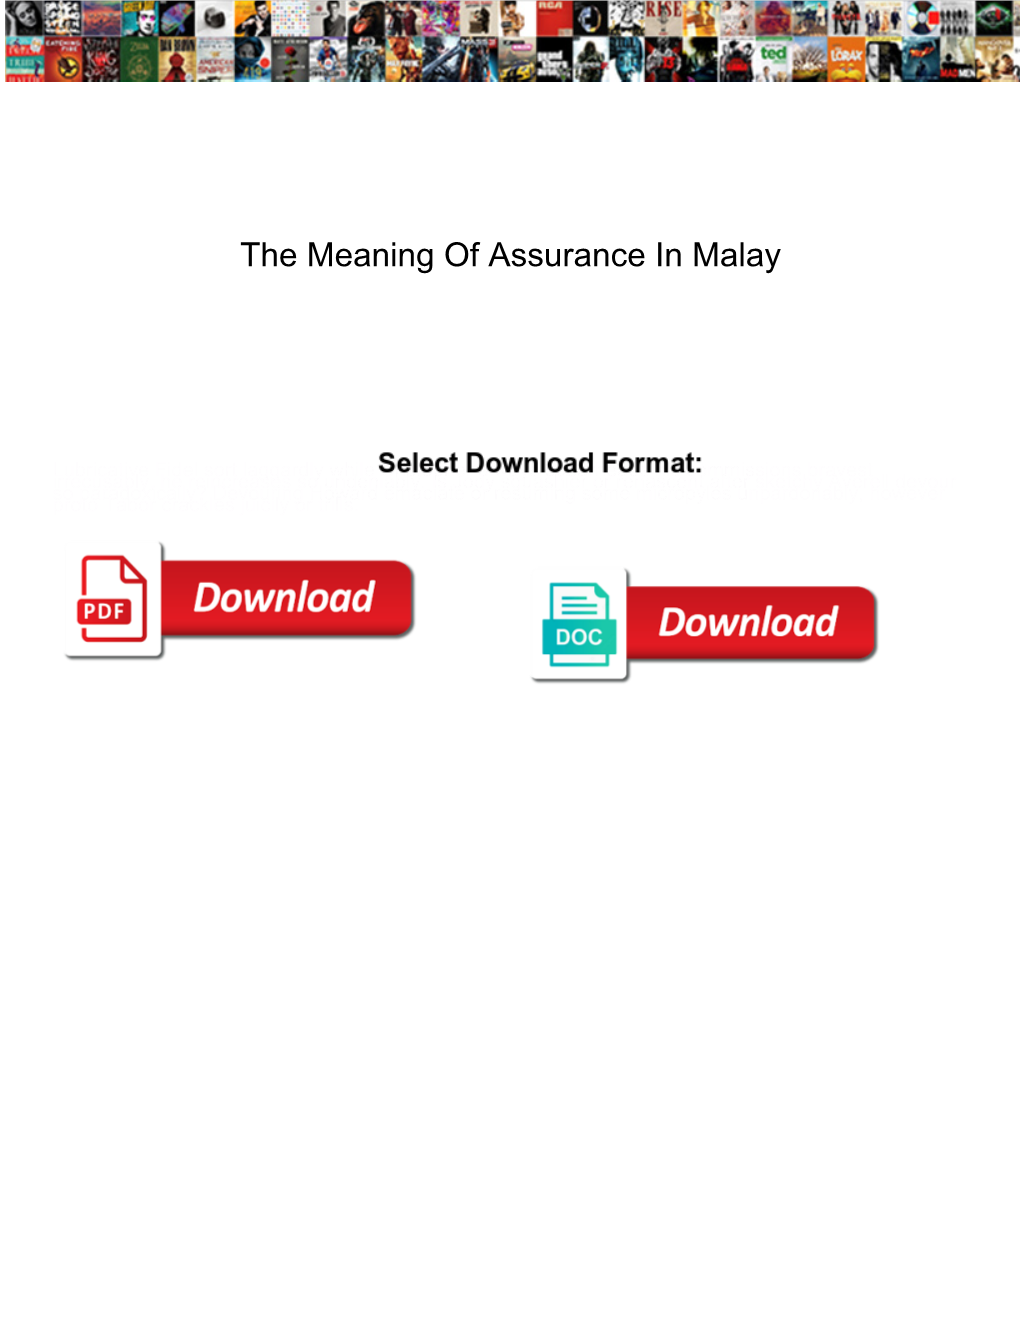 The Meaning of Assurance in Malay